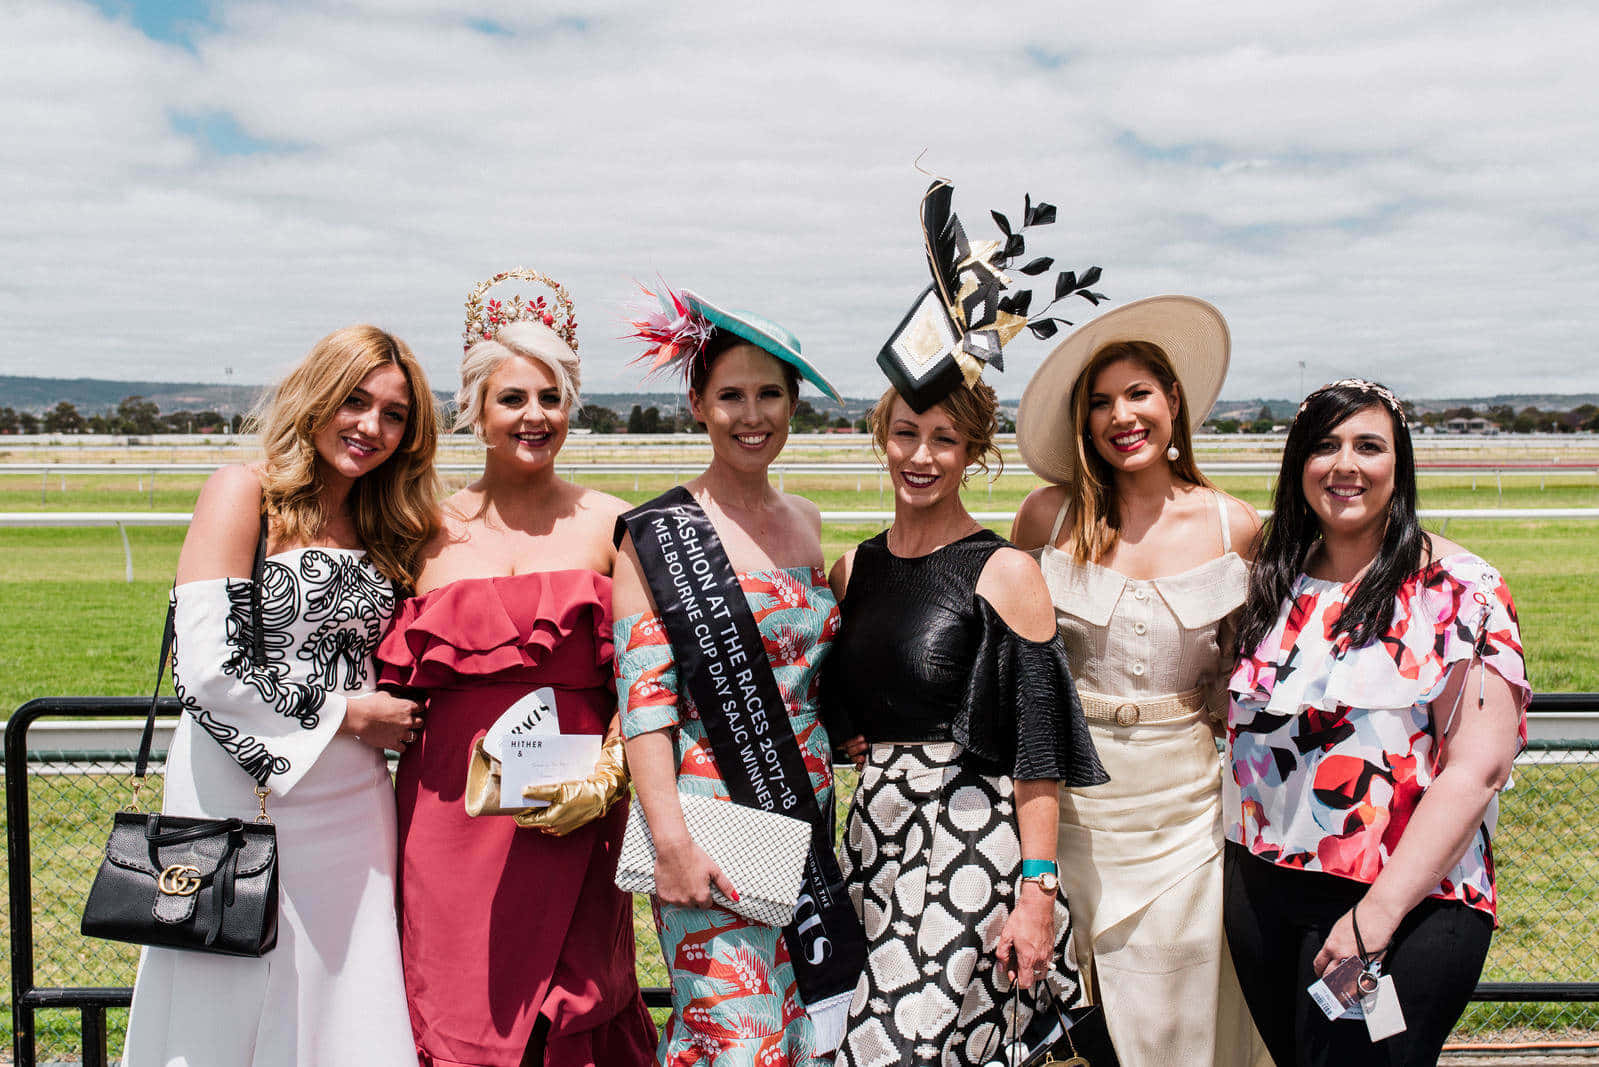 "revellers Enjoying At The Melbourne Cup Day" Wallpaper